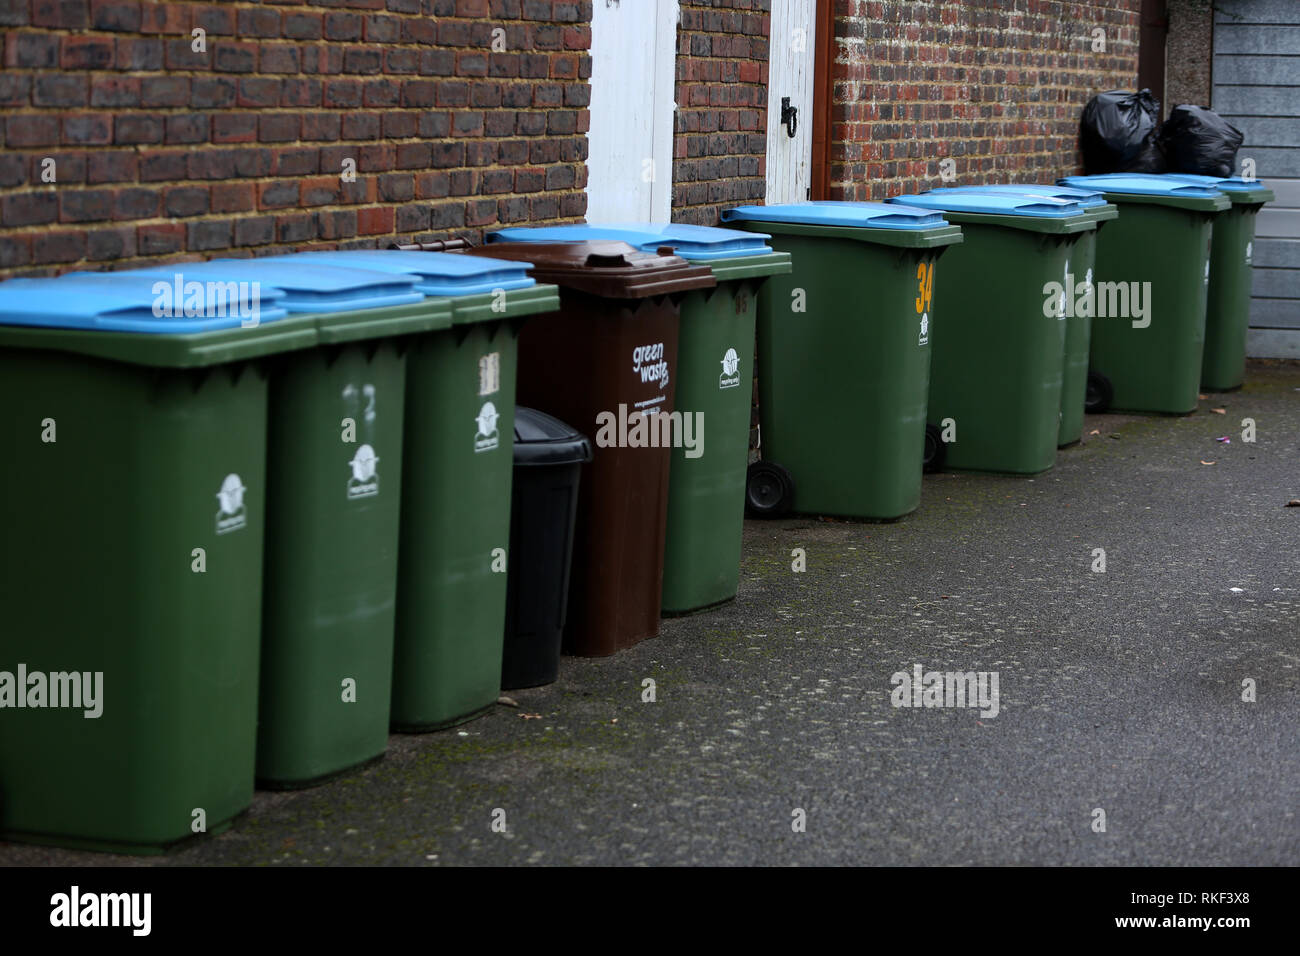 General view of some domestic bins in a street in Bognor Regis, West Sussex, UK. Stock Photo